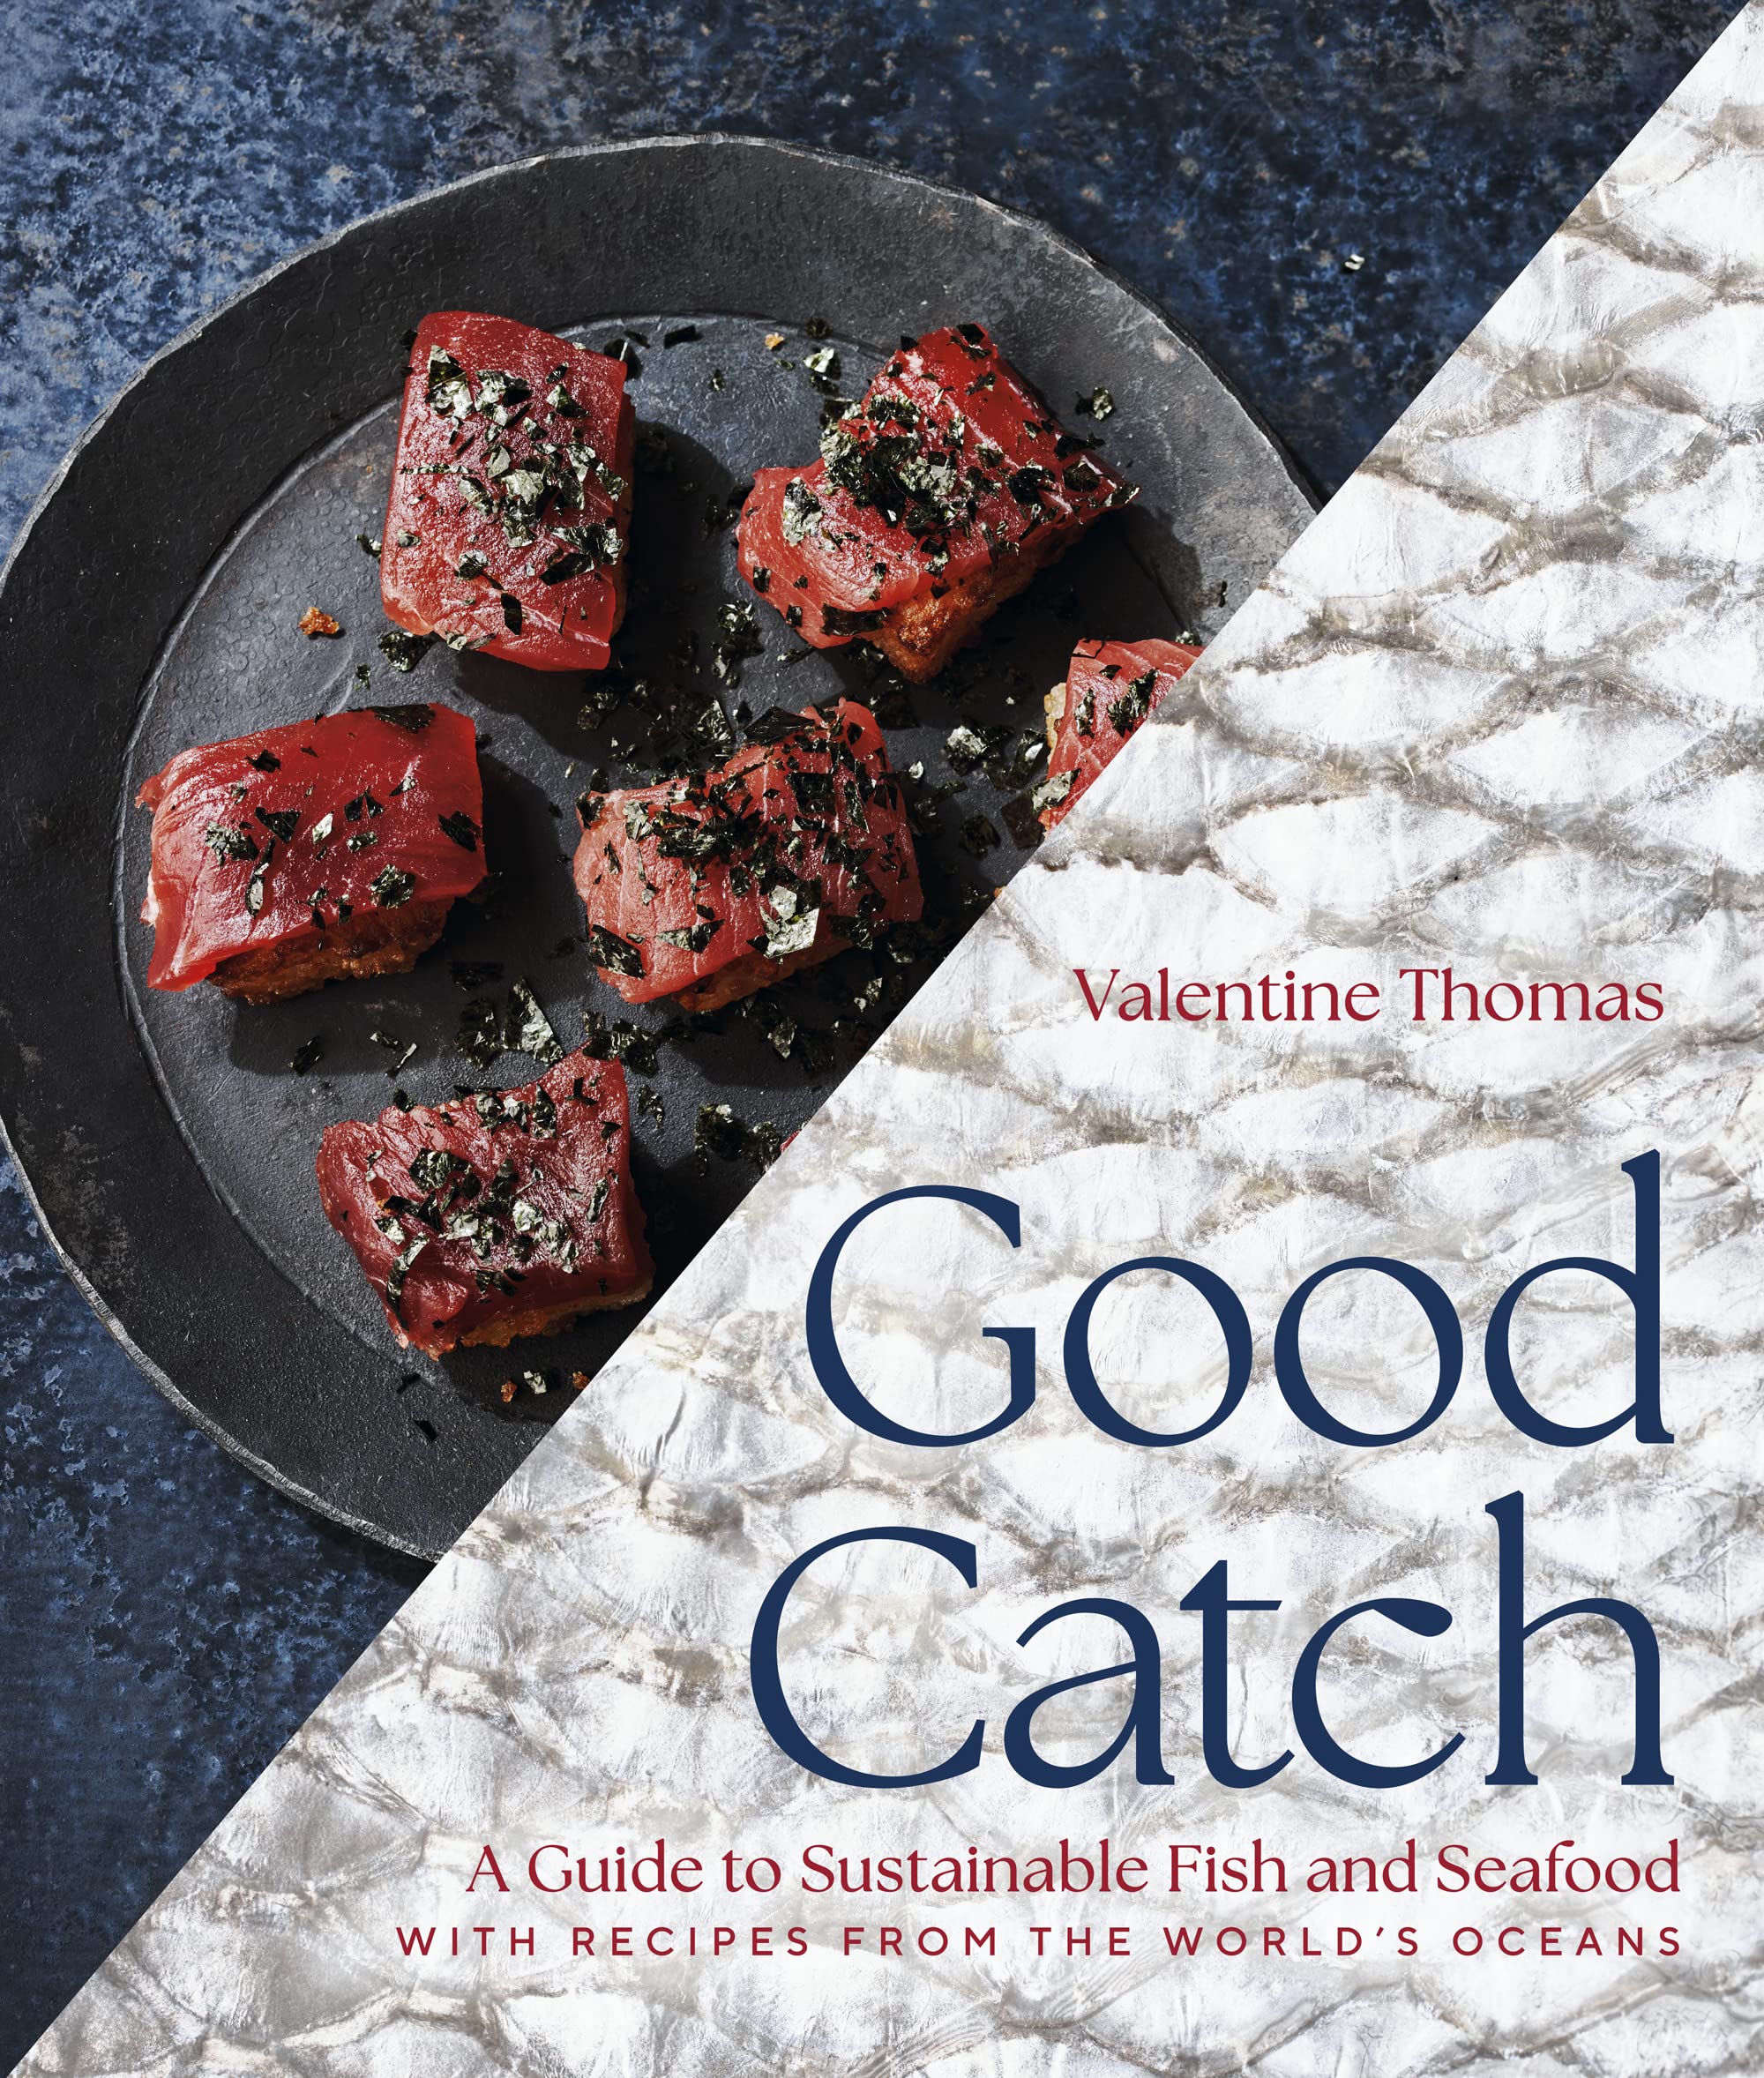 Good Catch: A Guide to Sustainable Fish and Seafood with Recipes from the World's Oceans (Valentine Tomas)